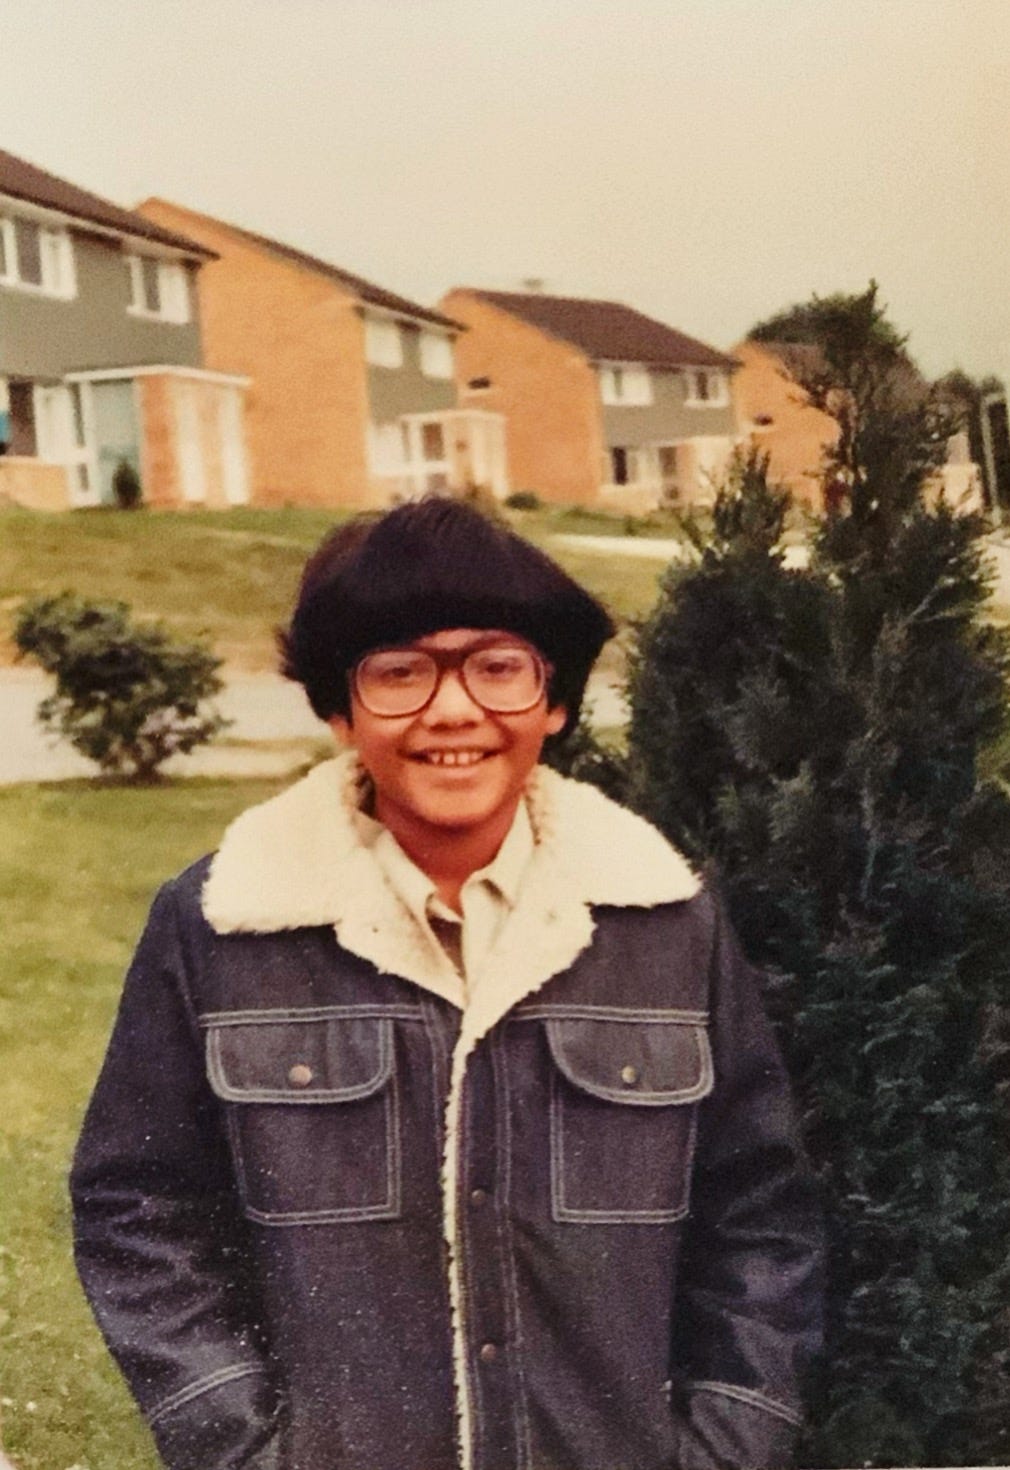 An early color photograph shows young brown skinned boy in thick 1970s glasses, and a bowl haircut, smiling at the camera. He wears a dark blue denim jacket with a fleece lining. He is standing outside in front of a row of houses.